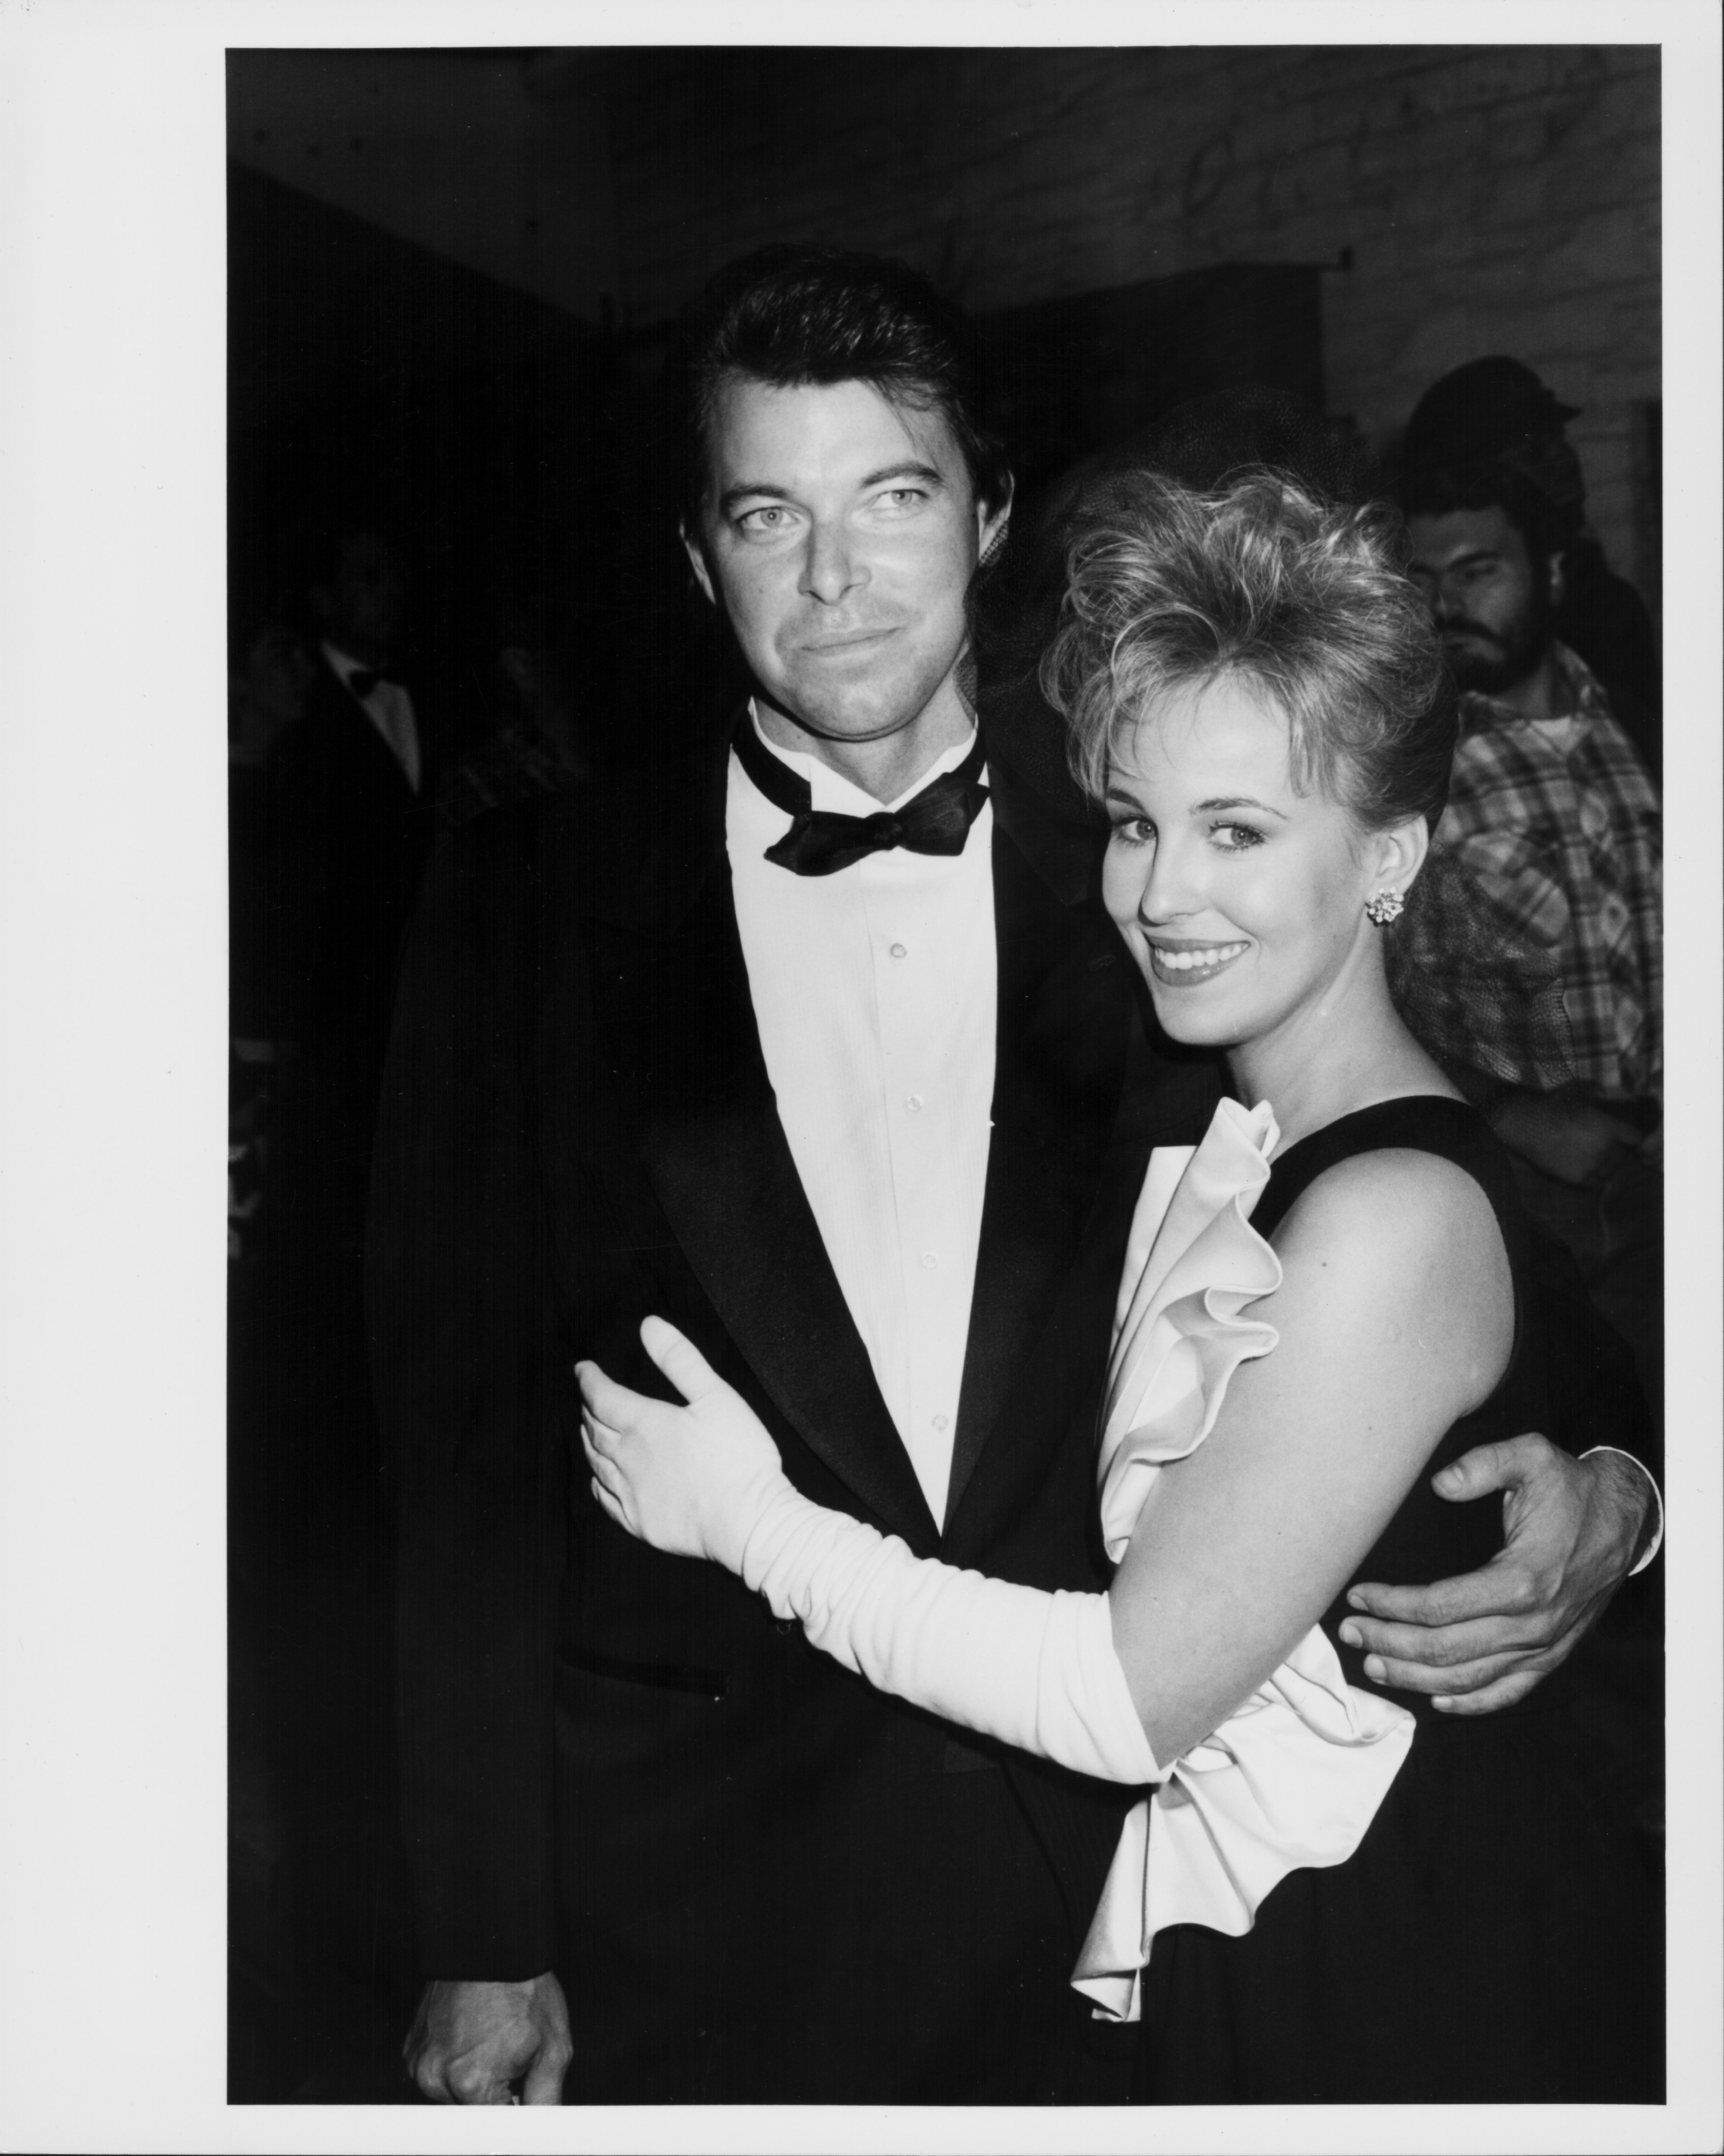 Jonathan Frakes and Genie Francis at the Soap Opera Awards, in Hollywood, California, on November 16, 1986. | Source: Getty Images